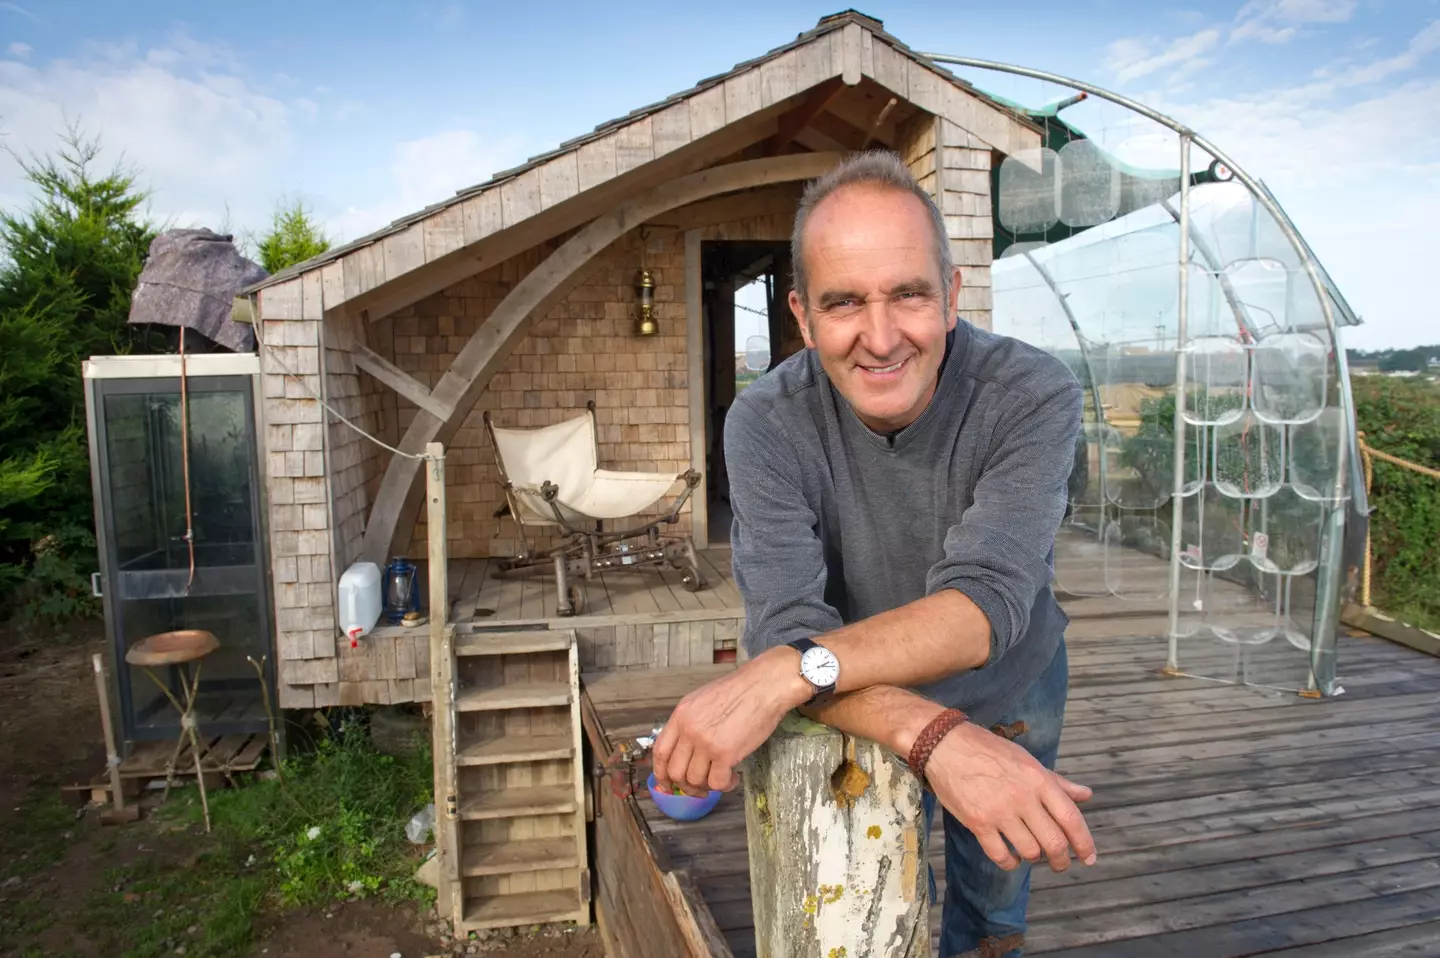 If there was a naked man behind much loved Grand Designs presenter Kevin McCloud he was entirely oblivious to it.